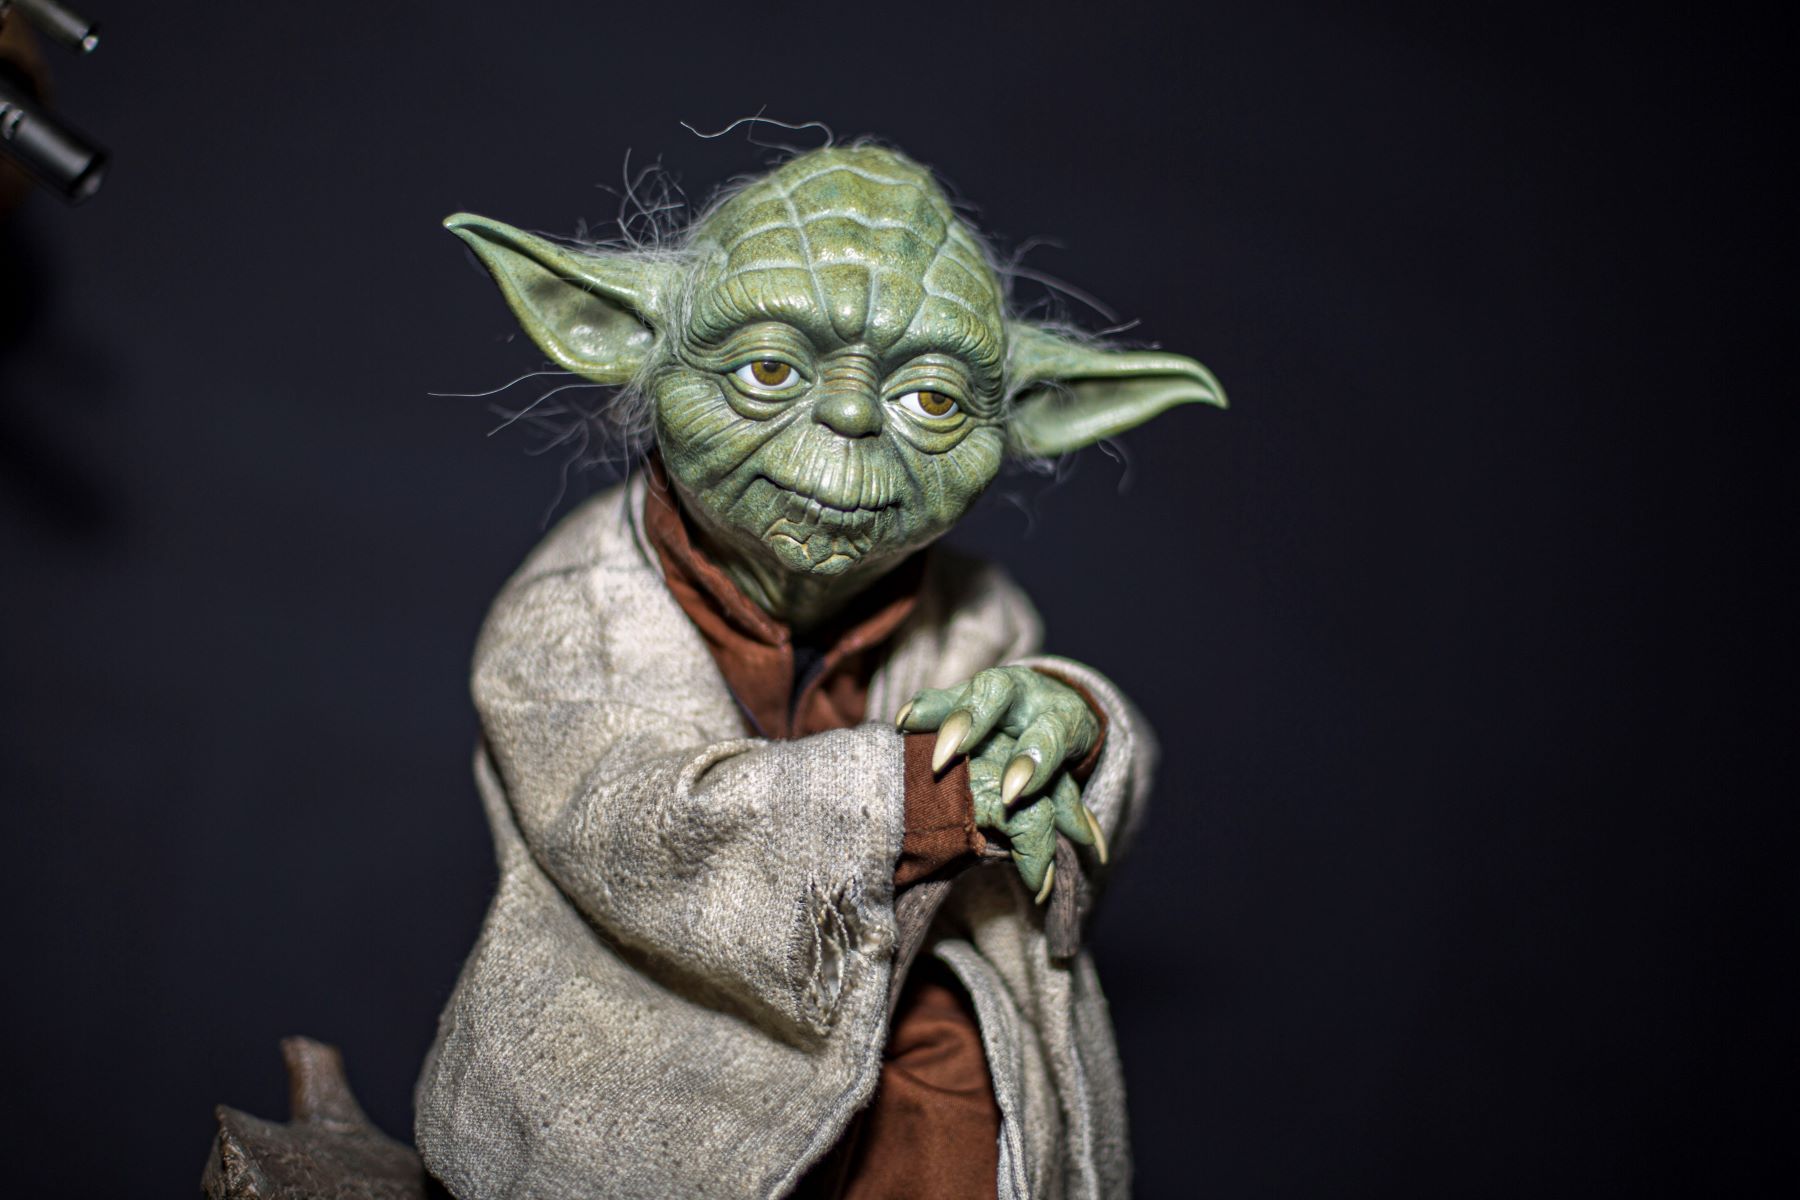 A statue of the Jedi Yoda at in a 'Star Wars' Comic-Con display